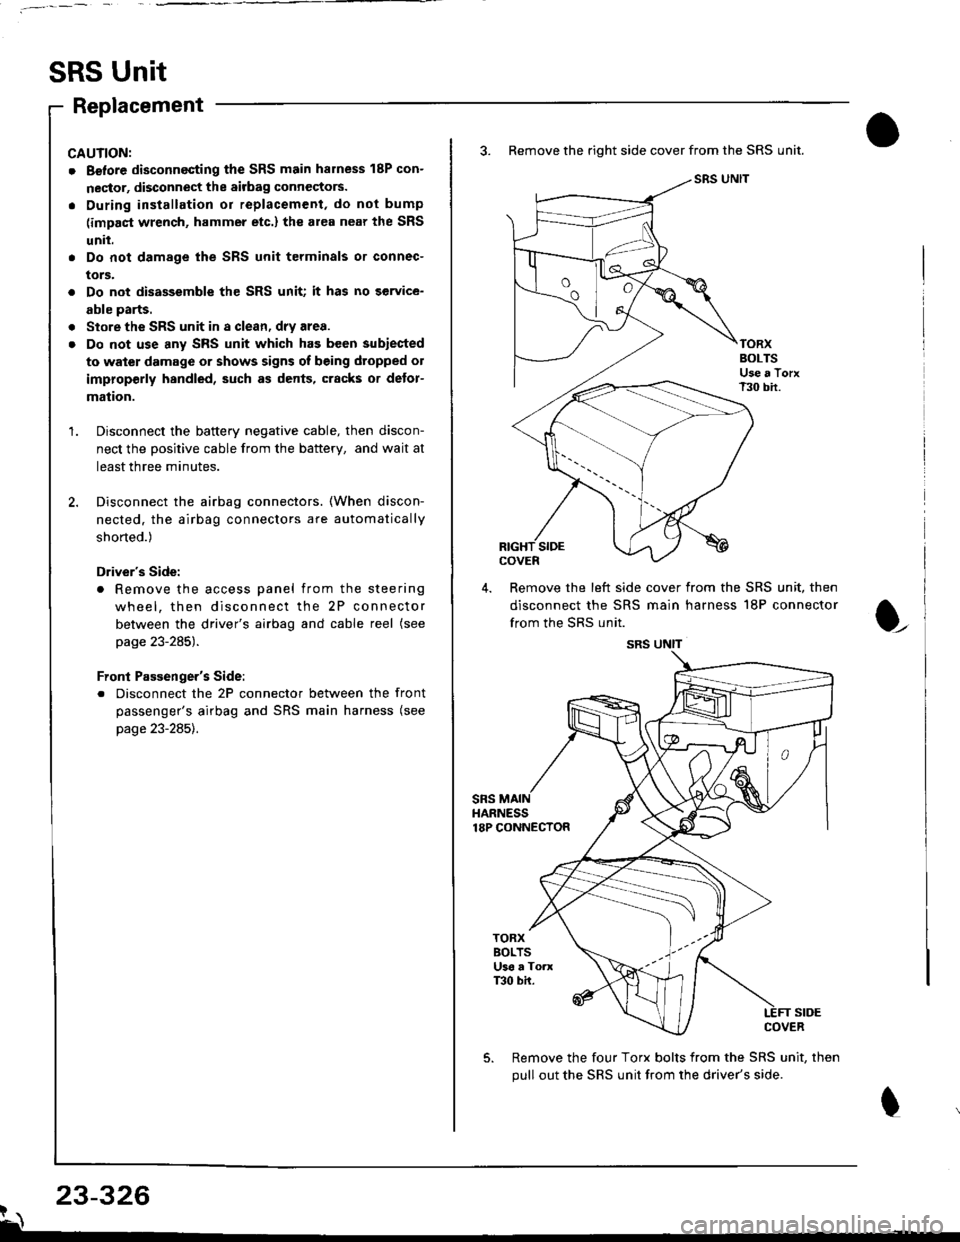 HONDA INTEGRA 1998 4.G Owners Manual SRS Unit
Replacement
CAUNON:
. Betore disconnecting the SRS main harness 18P con-
nector, disconnect the aitbag connectors.
. During installation or replacement, do not bump
(impact wrench, hammer etc